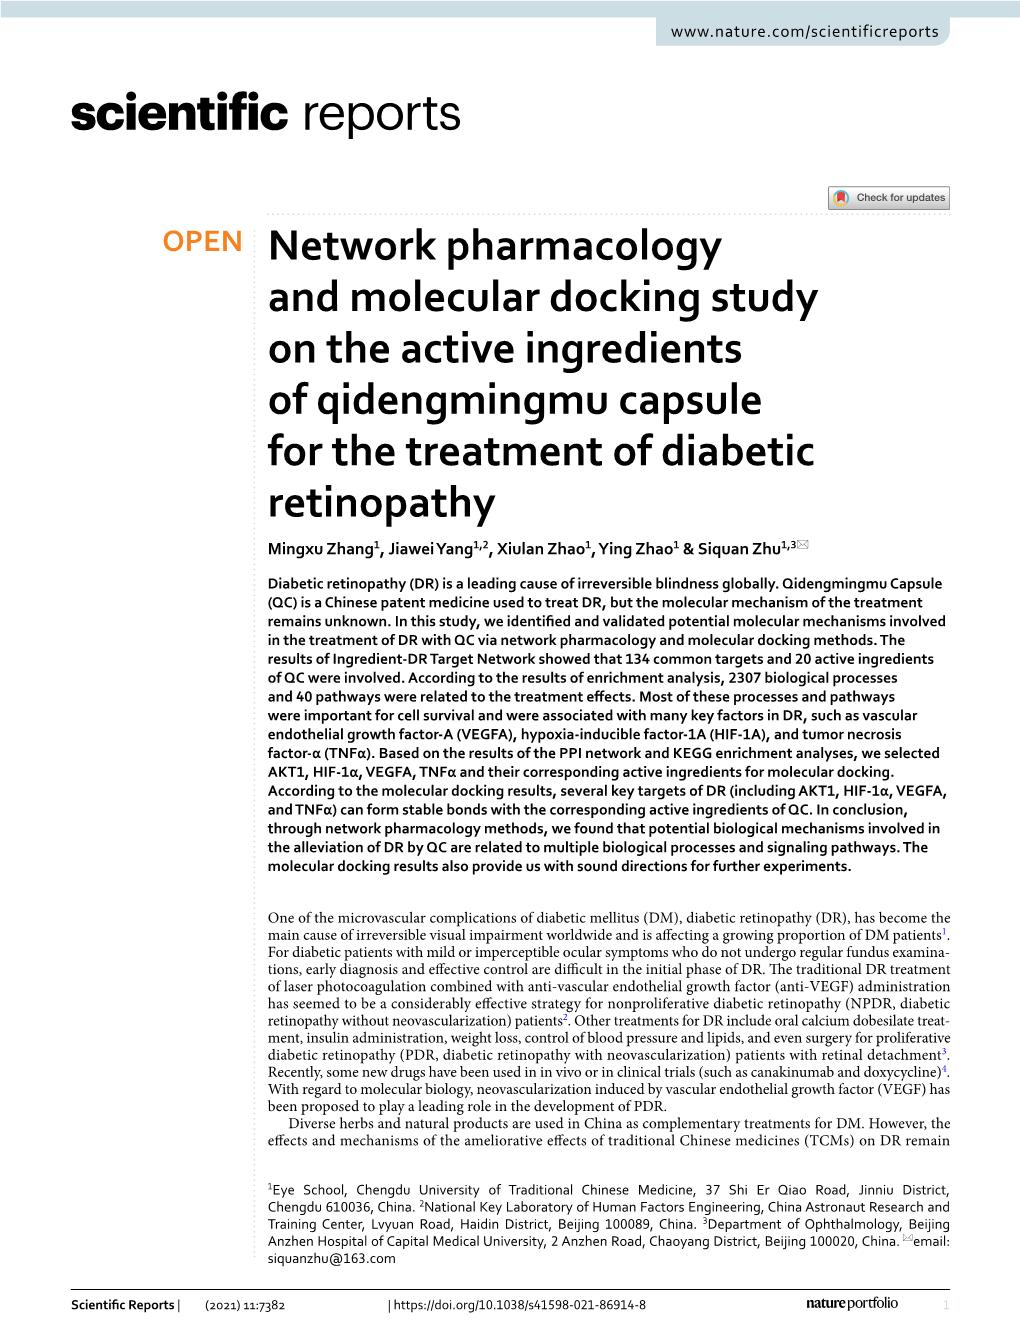 Network Pharmacology and Molecular Docking Study on the Active